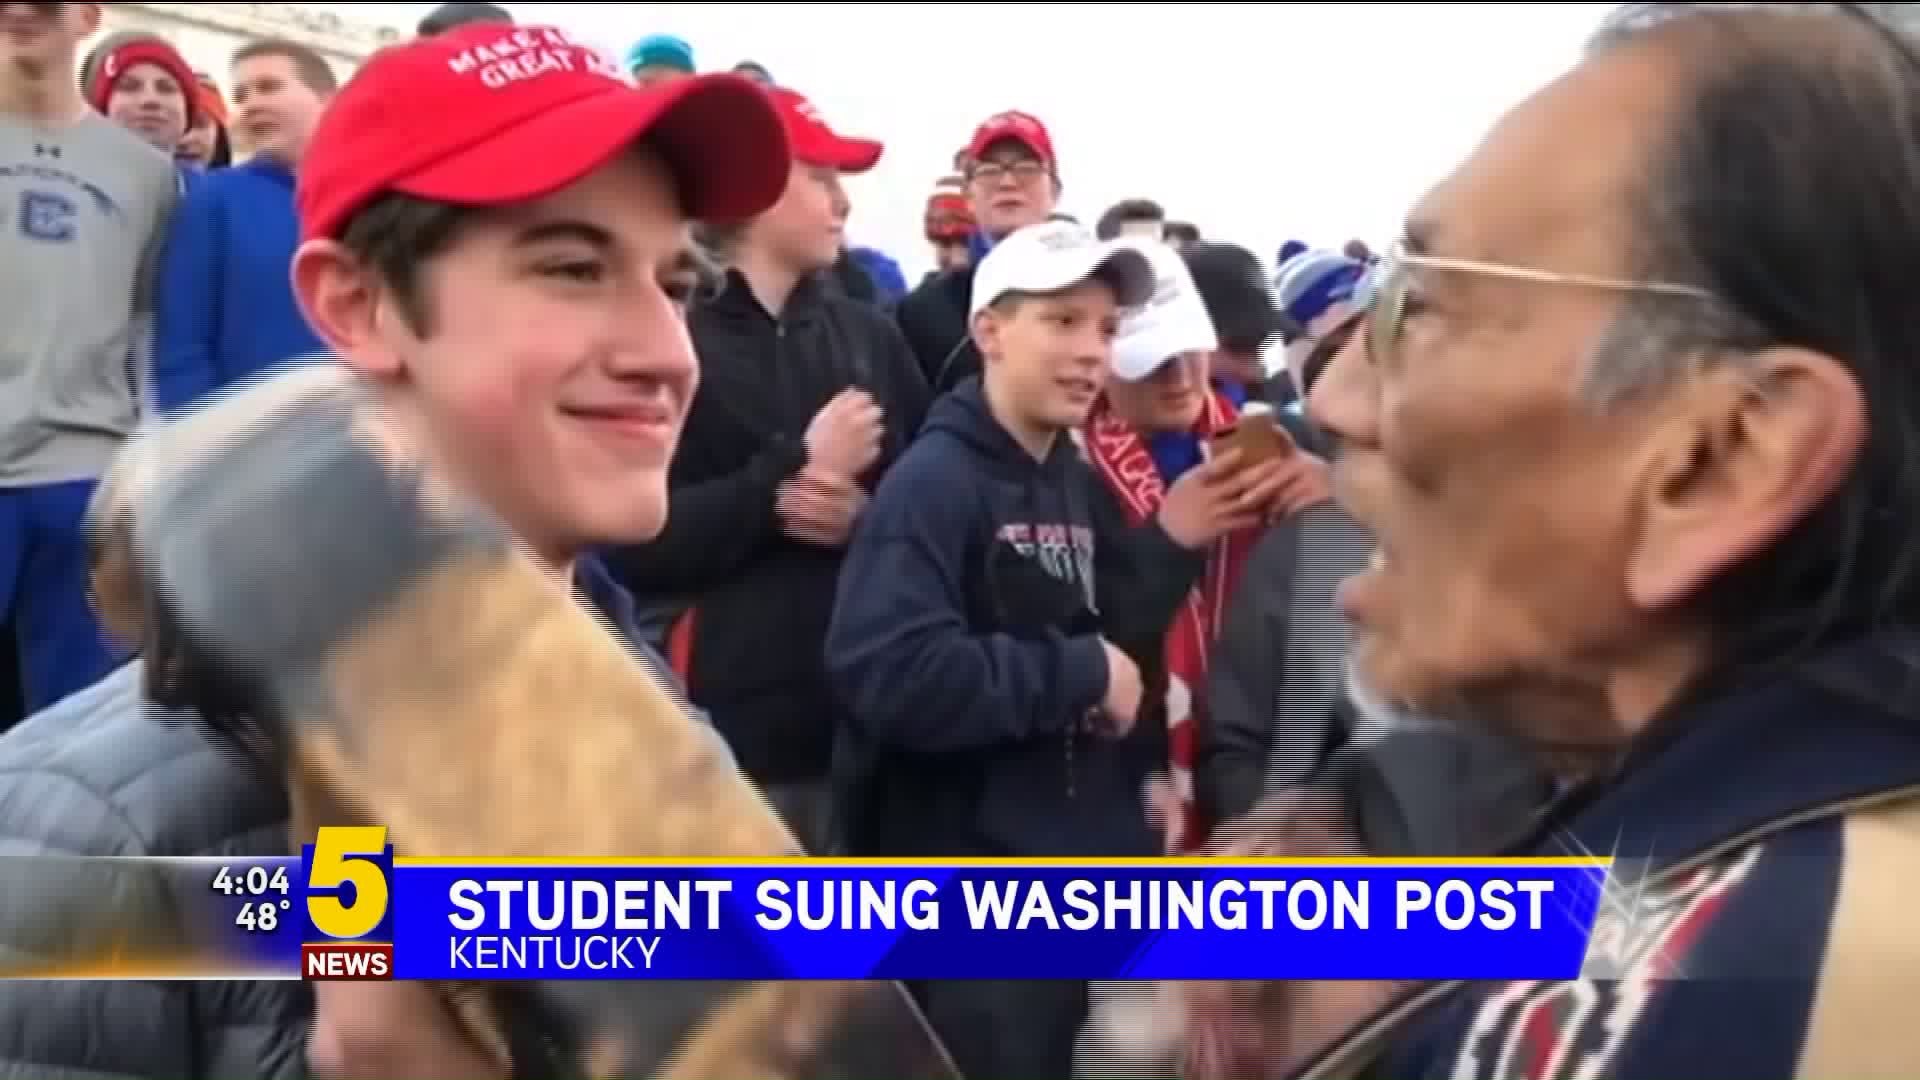 Kentucky Student`s Family Suing Washington Post Over Viral Video Coverage